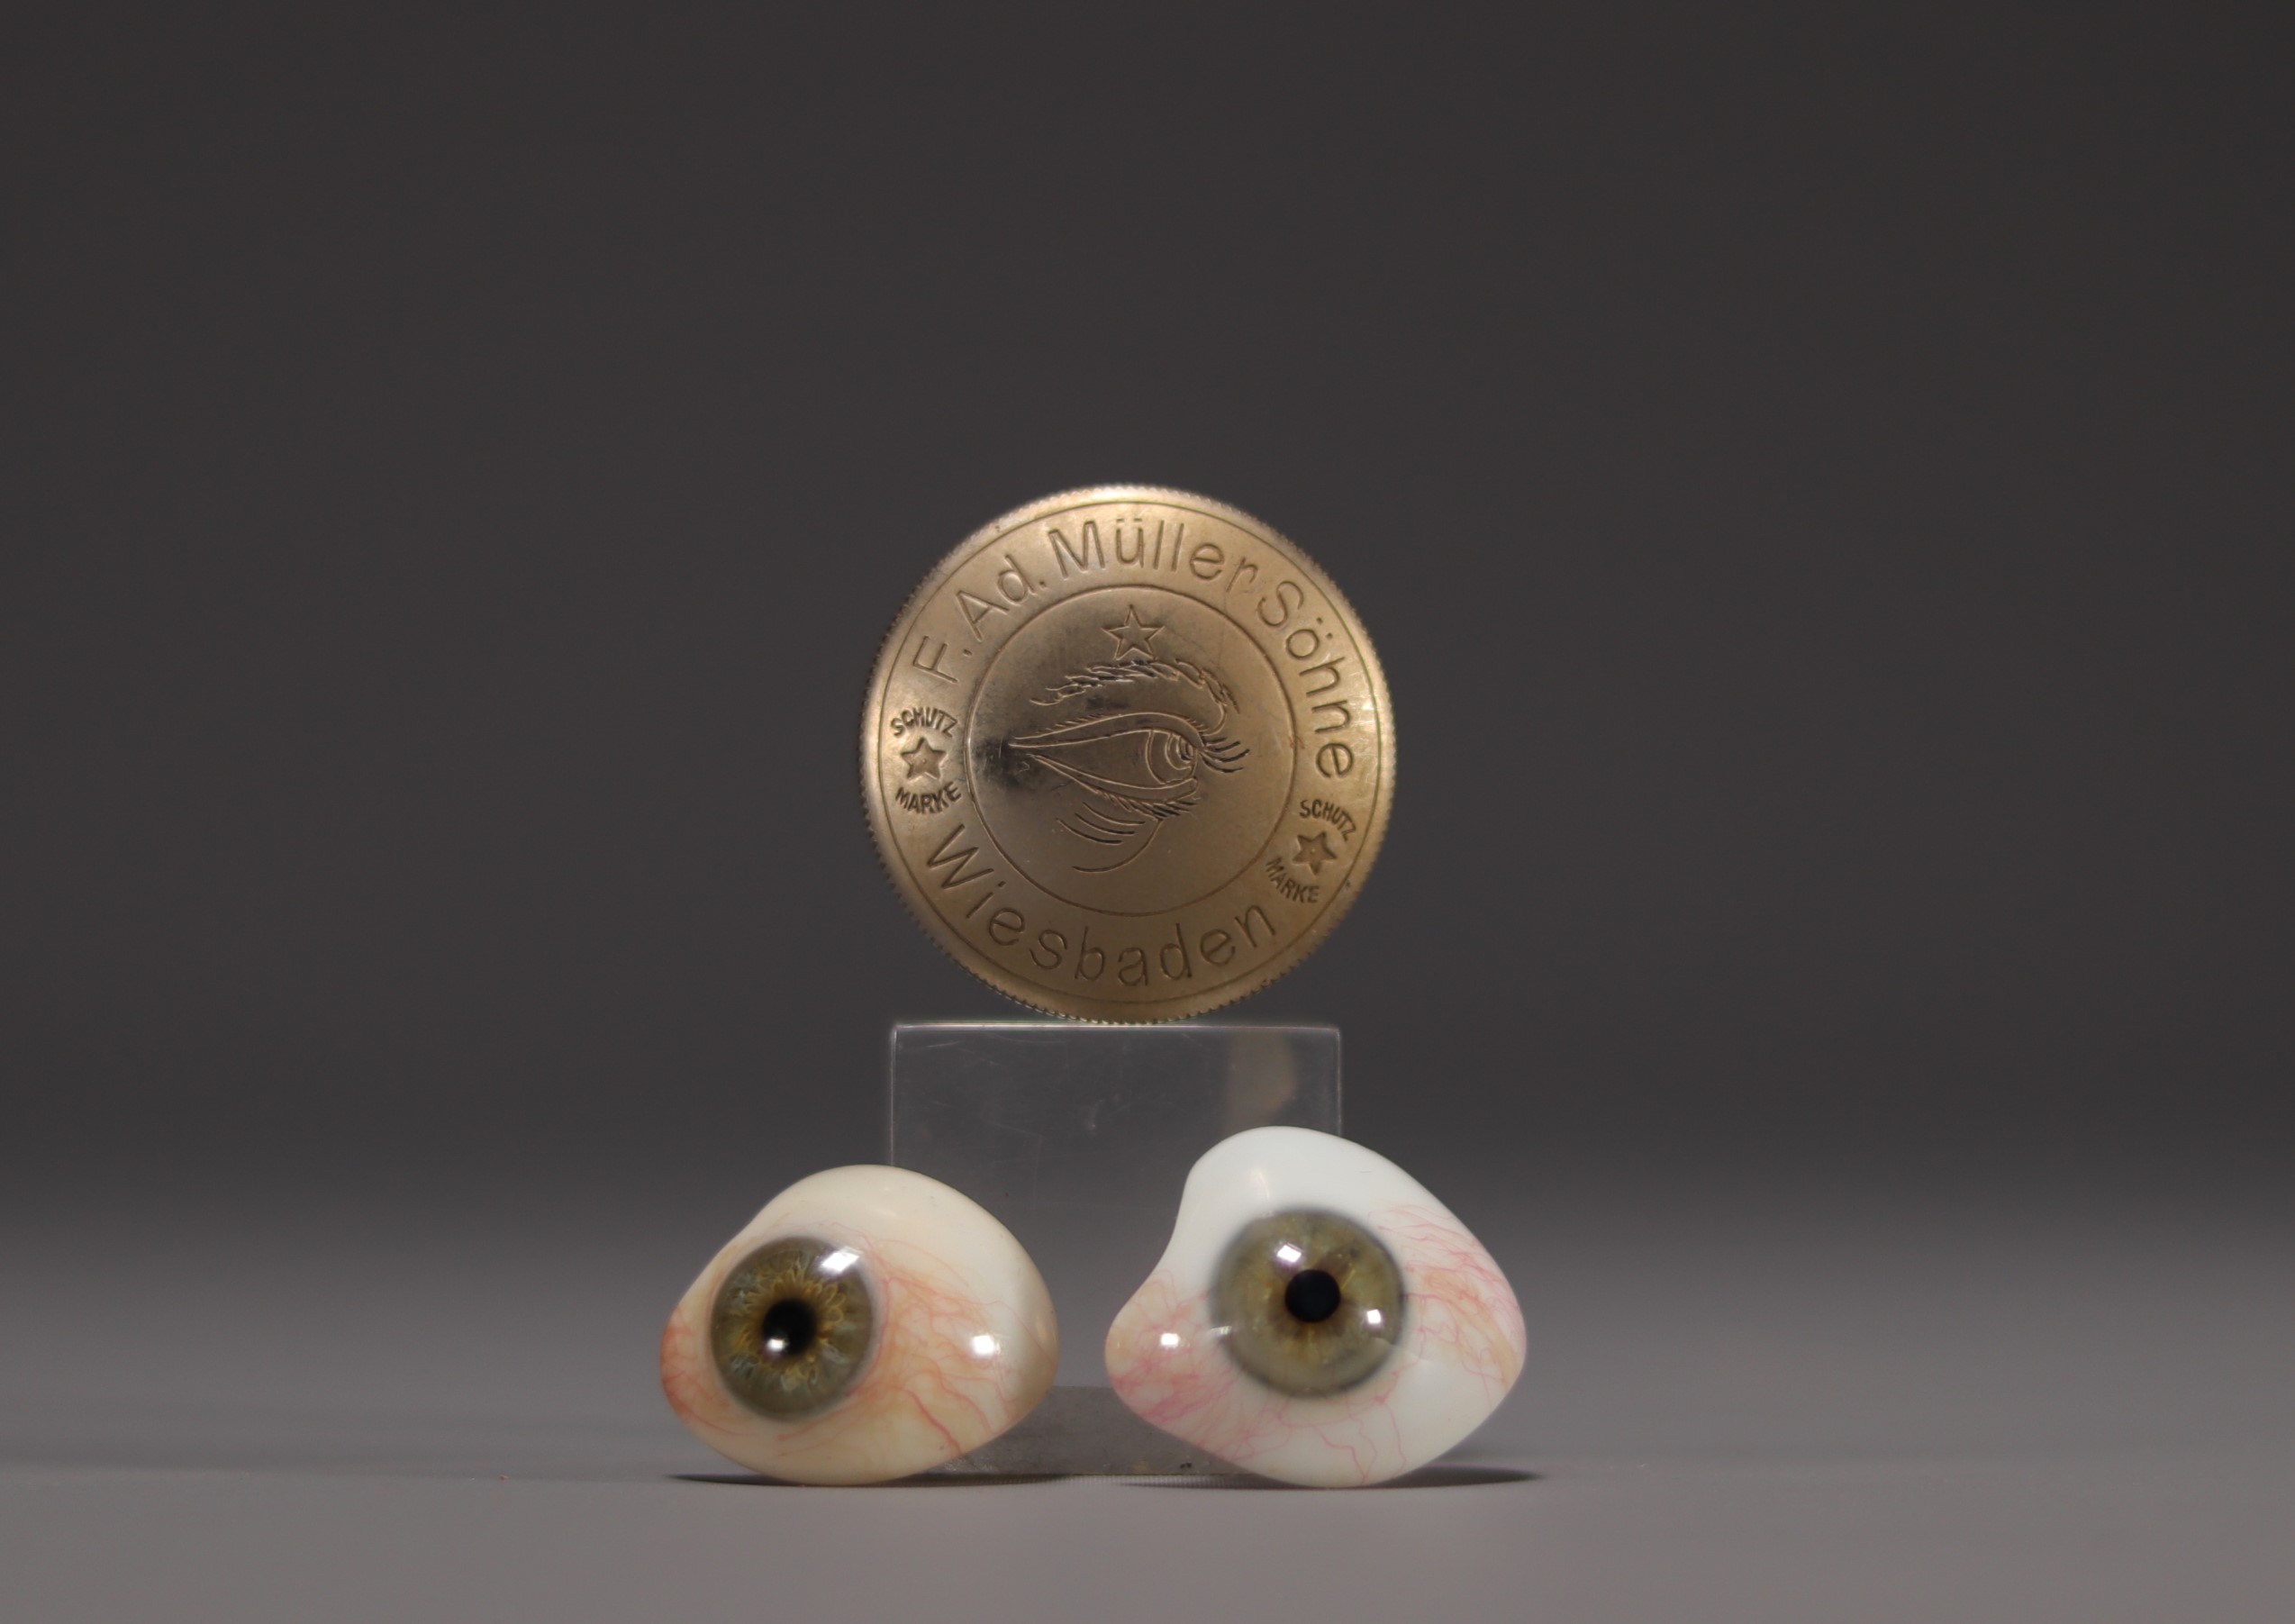 Muller Sohne Wiesbaden - Small box containing two ocular prostheses (glass eyes).